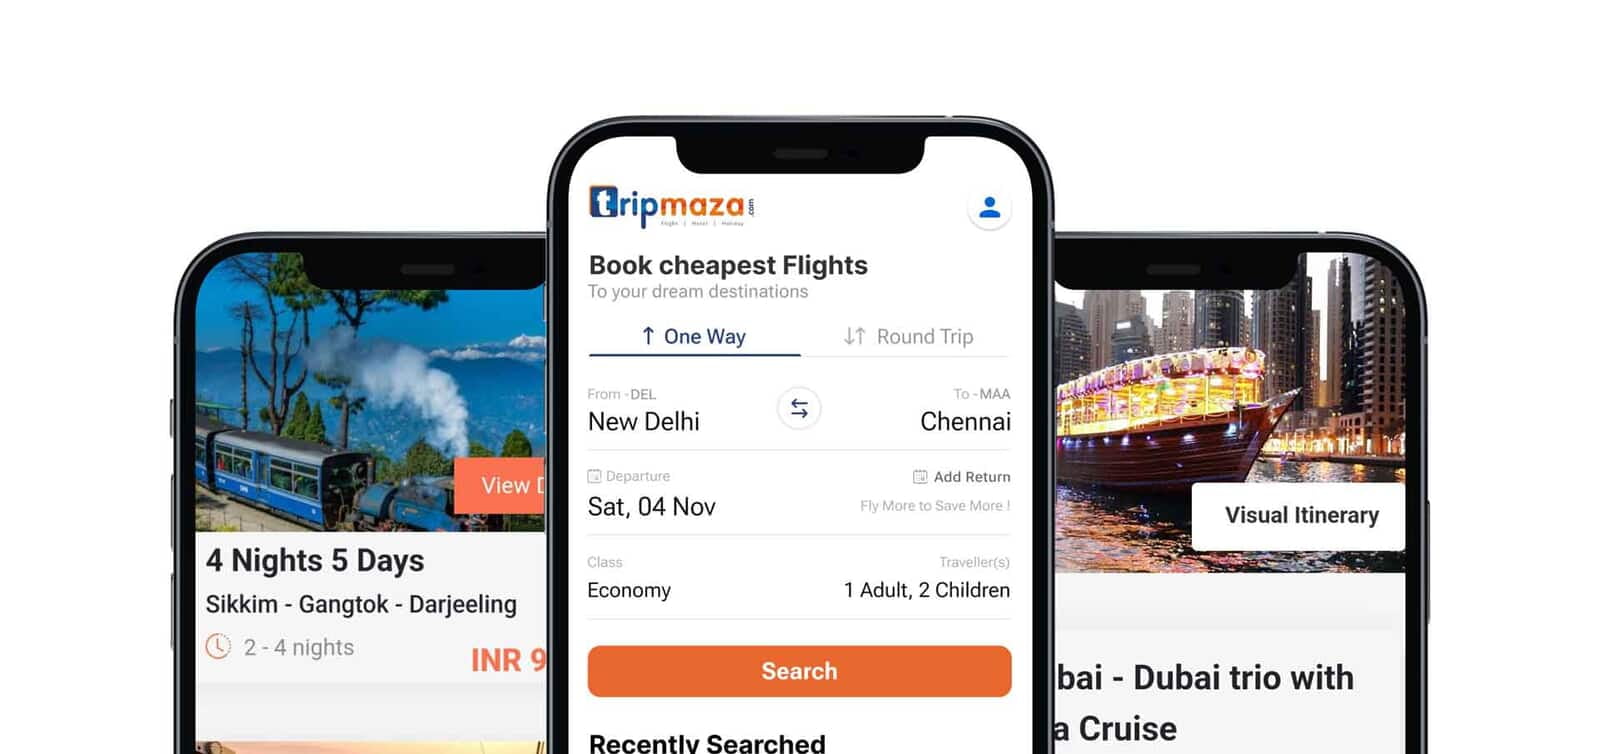 book cheaper flight tickets online, save on flights, book flight tickets online, find cheaper flights, how to book a cheaper flight, finding the cheapest flight booking, Offer On Flight Booking